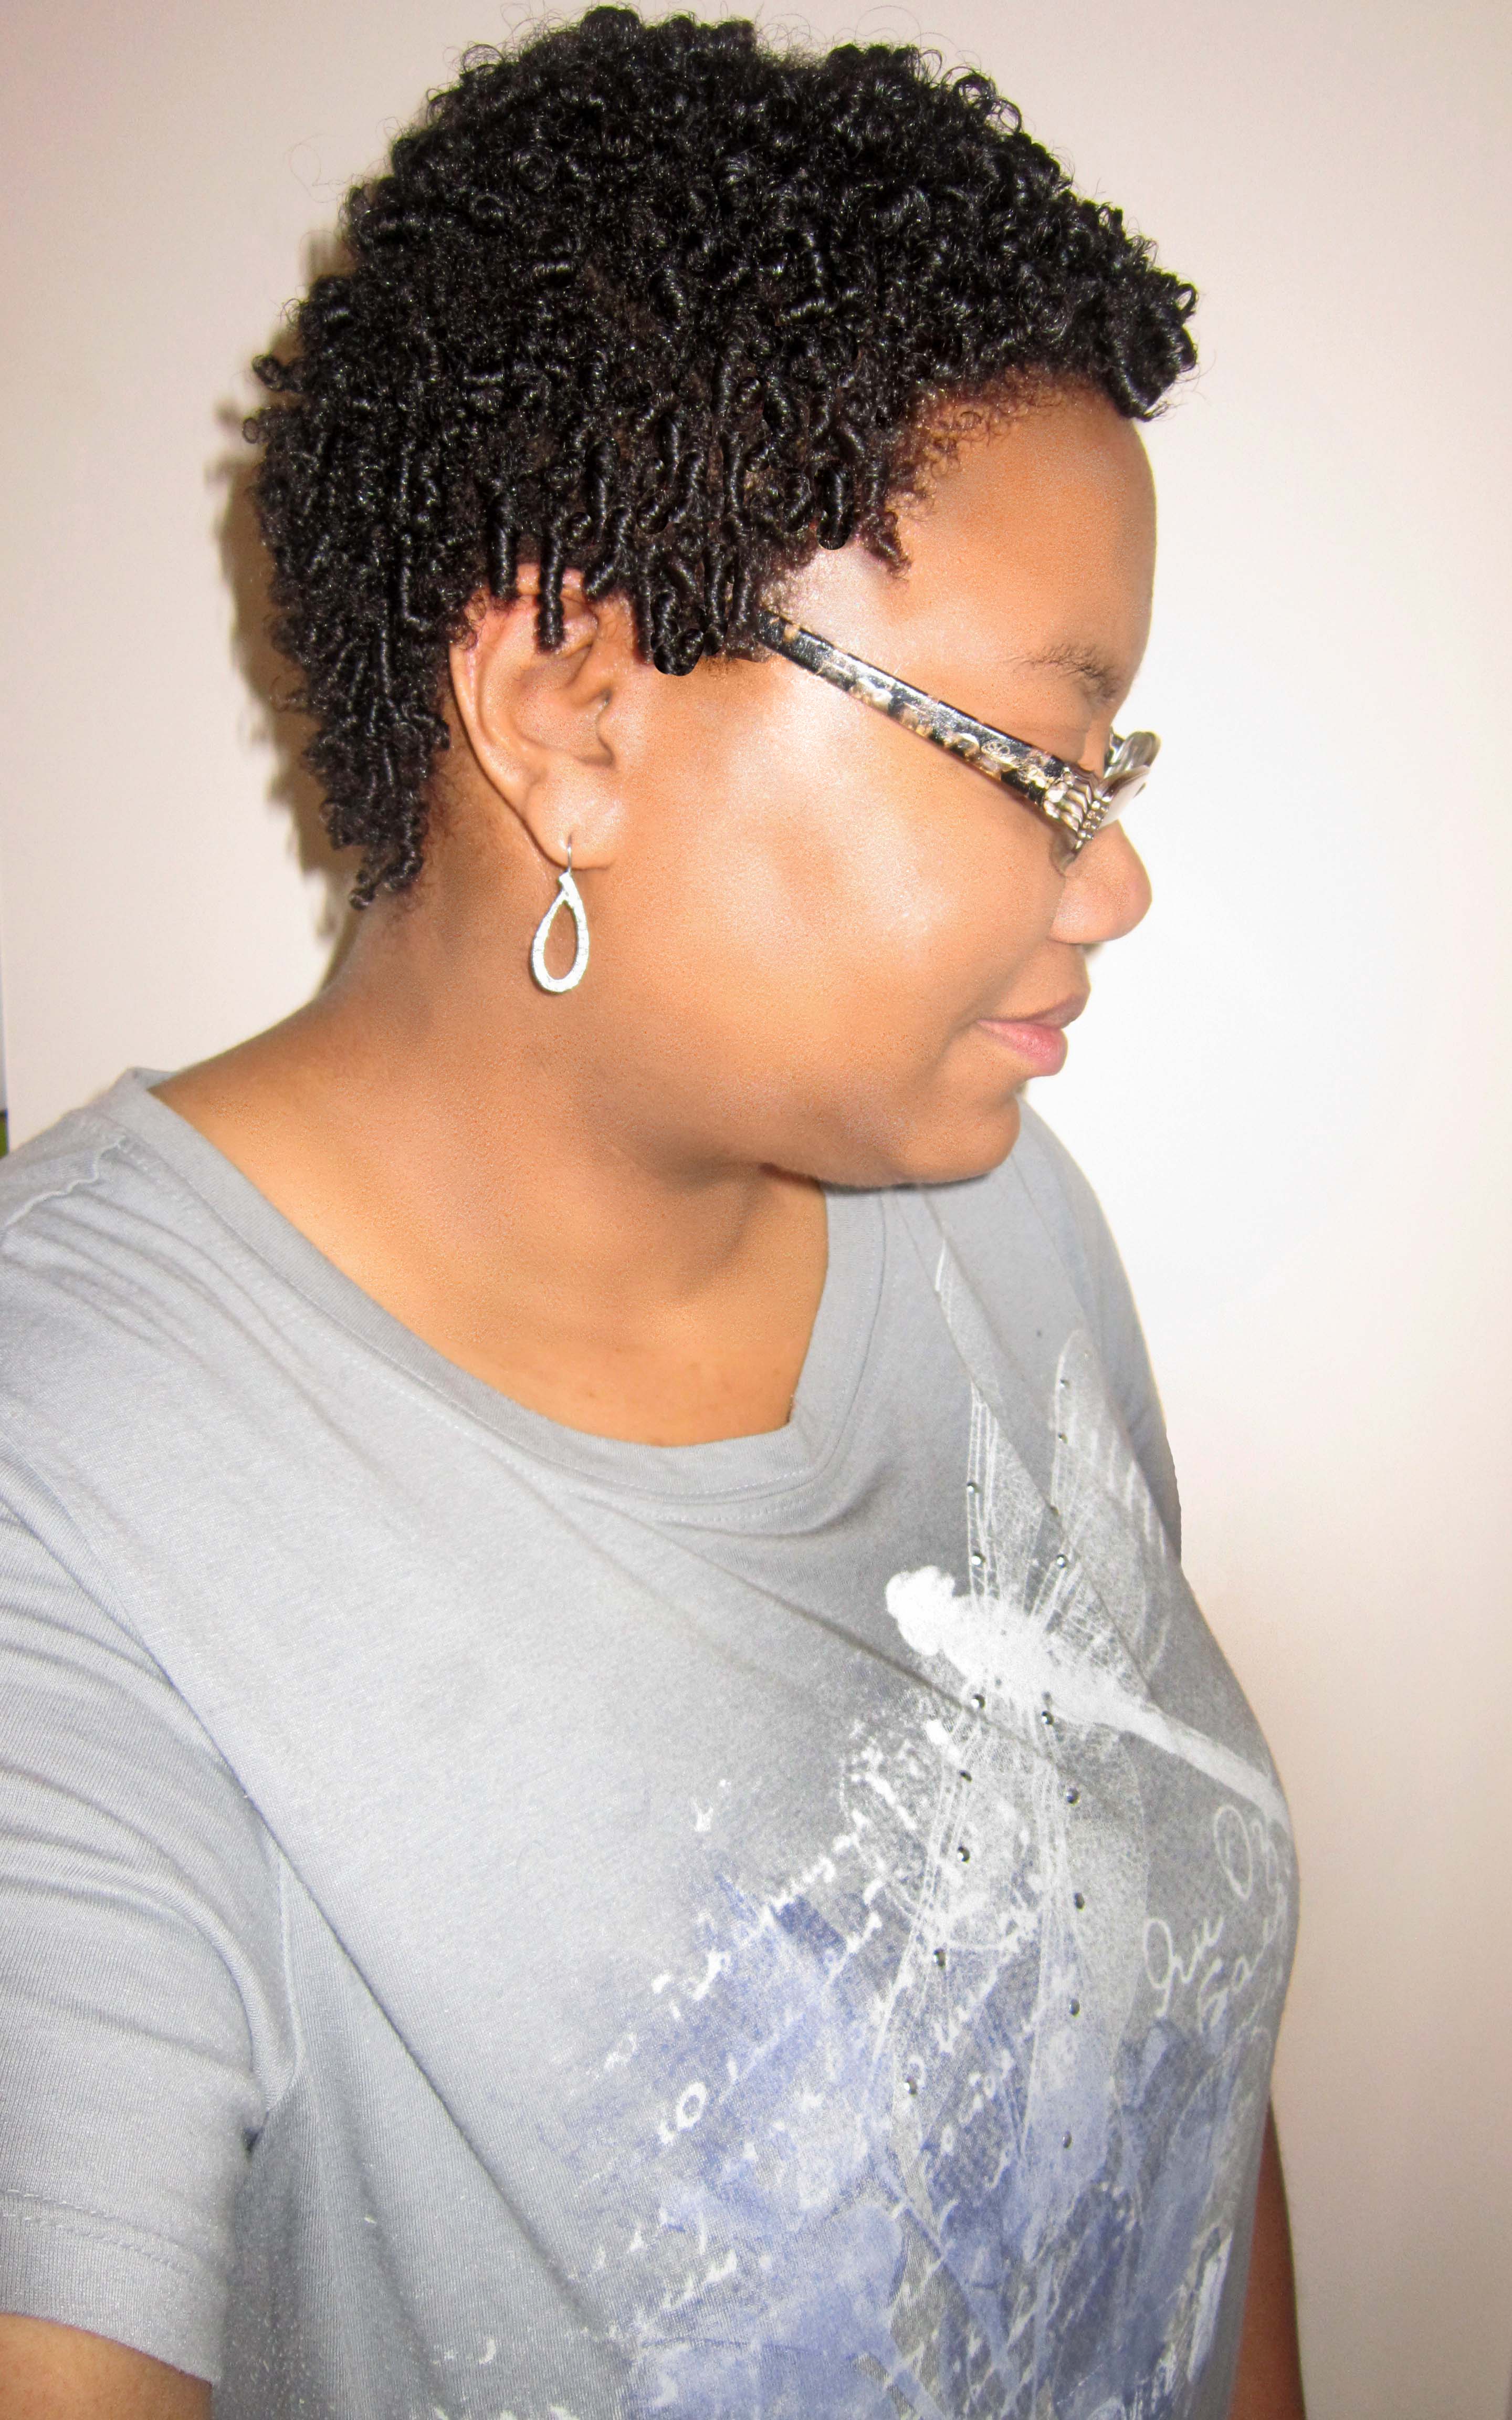 Finger Coils Single Strand Twists On Short Natural Hair Relaxed Transitioning Natural Beautiful